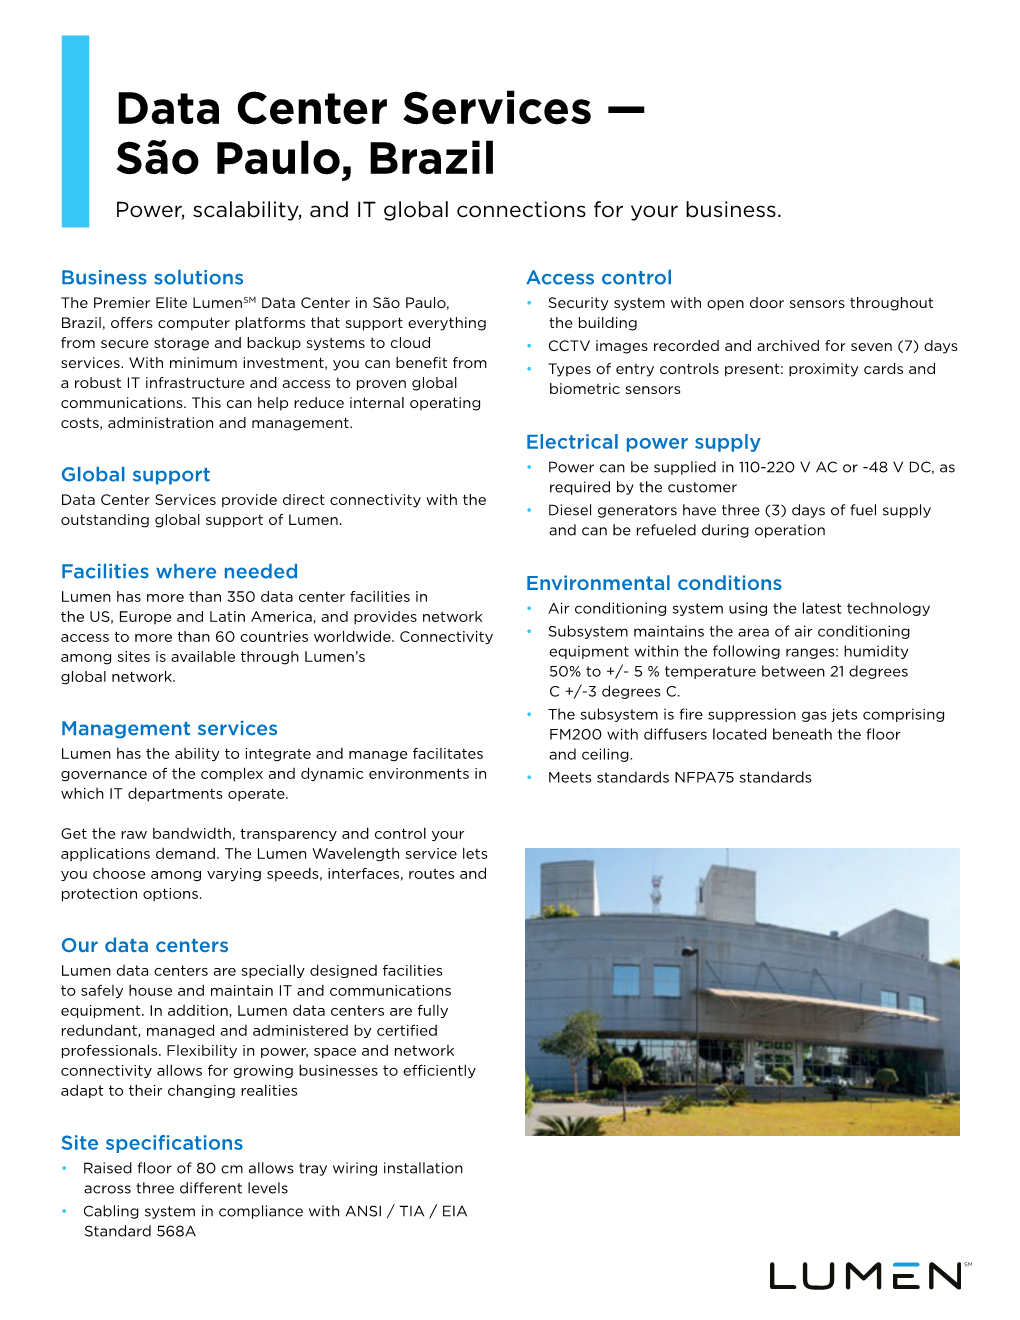 Data Center Services — São Paulo, Brazil Power, Scalability, and IT Global Connections for Your Business